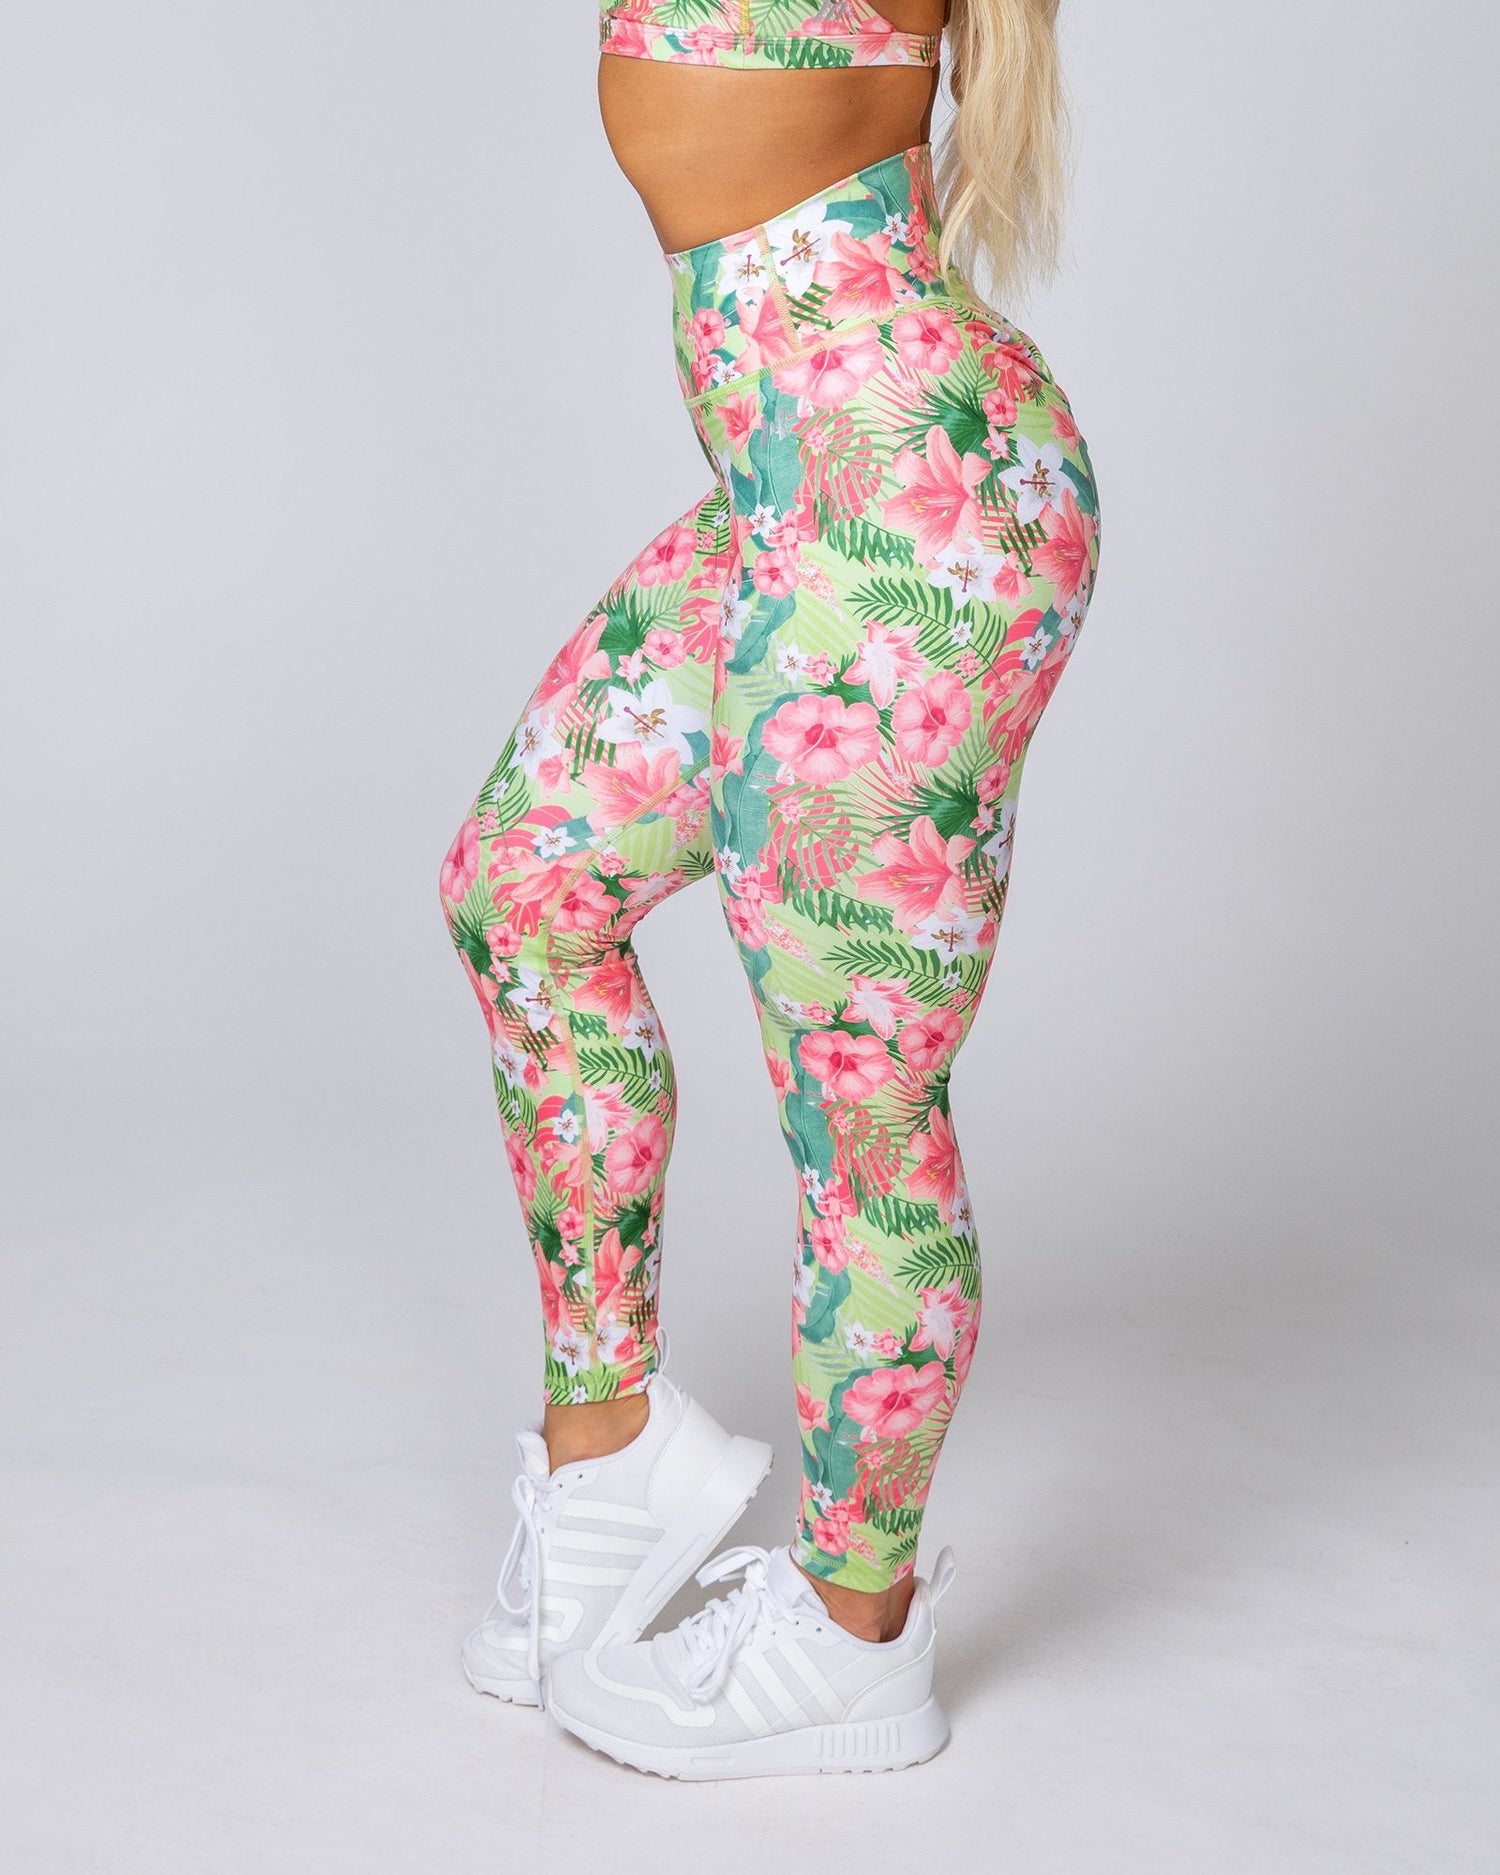 Women's Fashion Love Butterfly Print Pants Yoga Fitness Casual